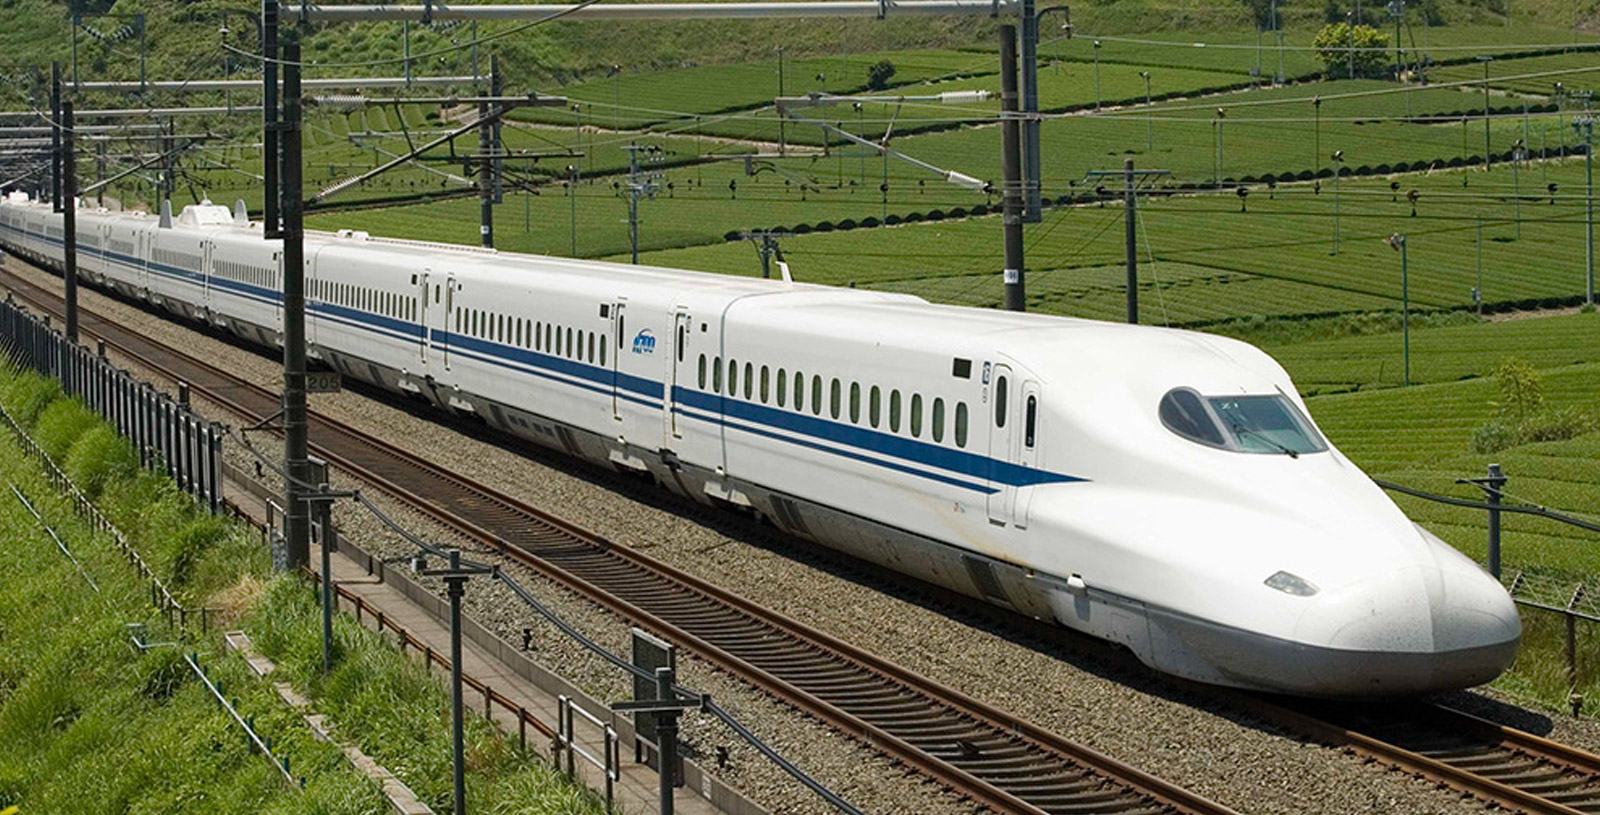 Dallas to Fort Worth High-Speed Rail